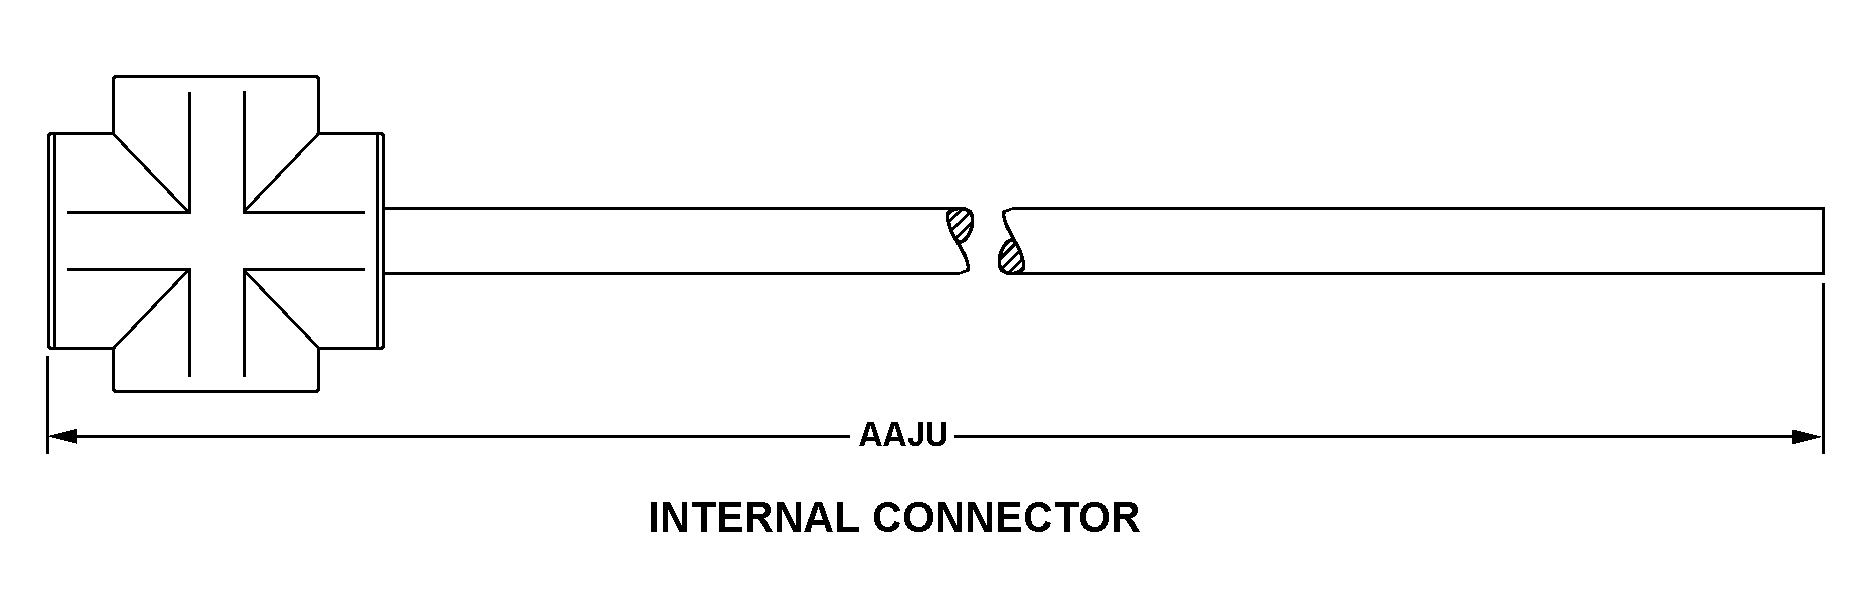 INTERNAL CONNECTOR style nsn 6150-01-150-5814